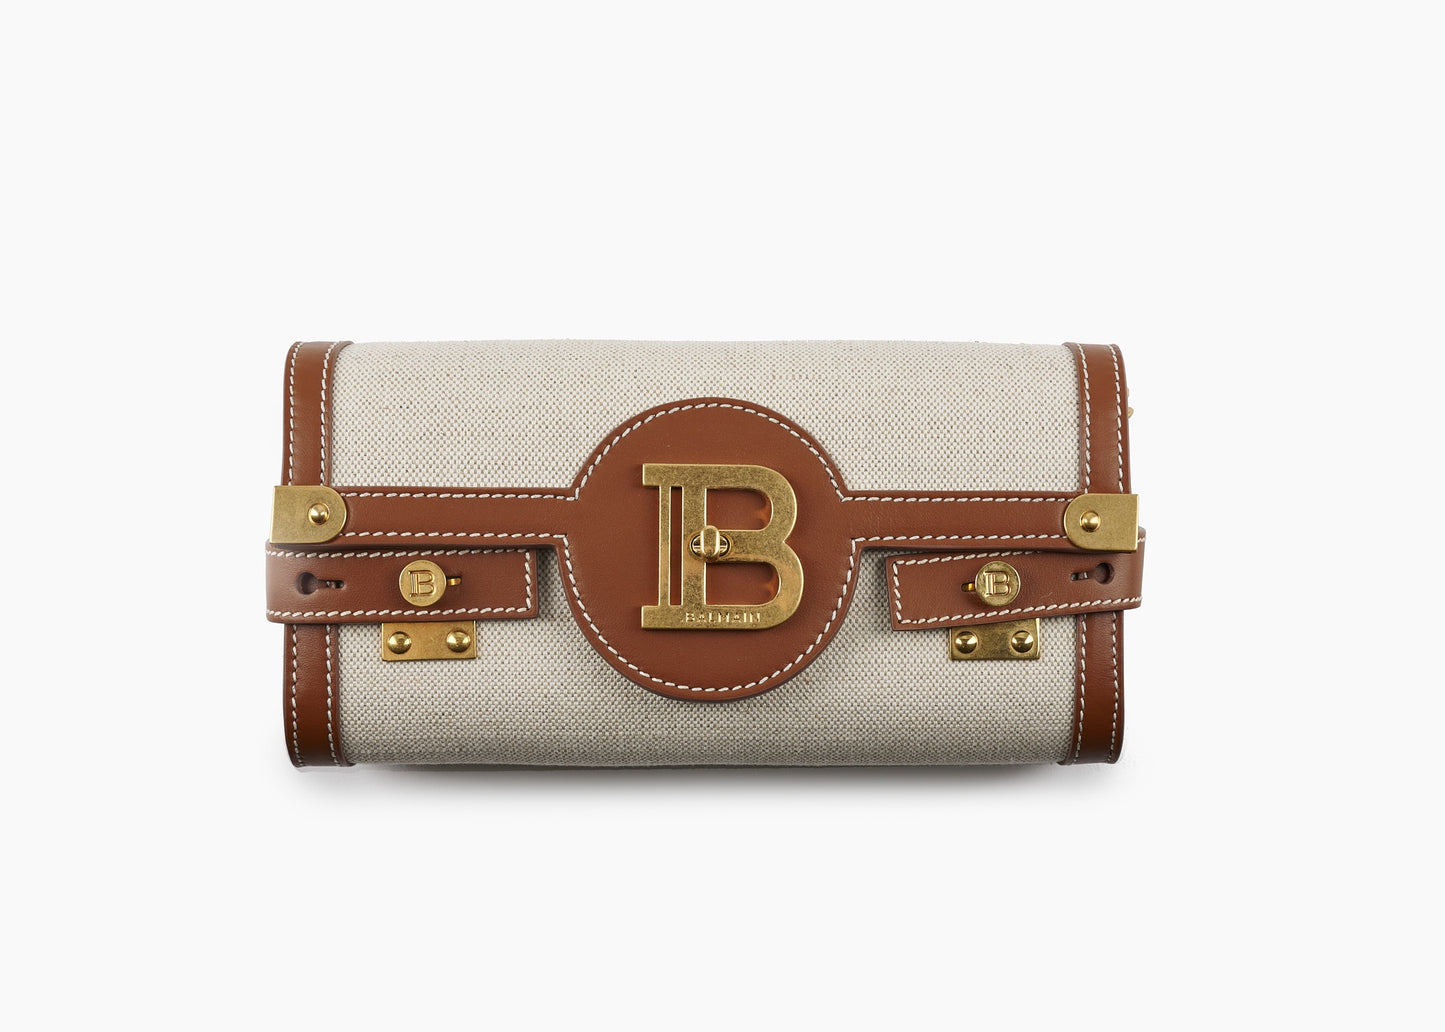 B-Buzz 23 Clutch Canvas and Leather Bag Tan